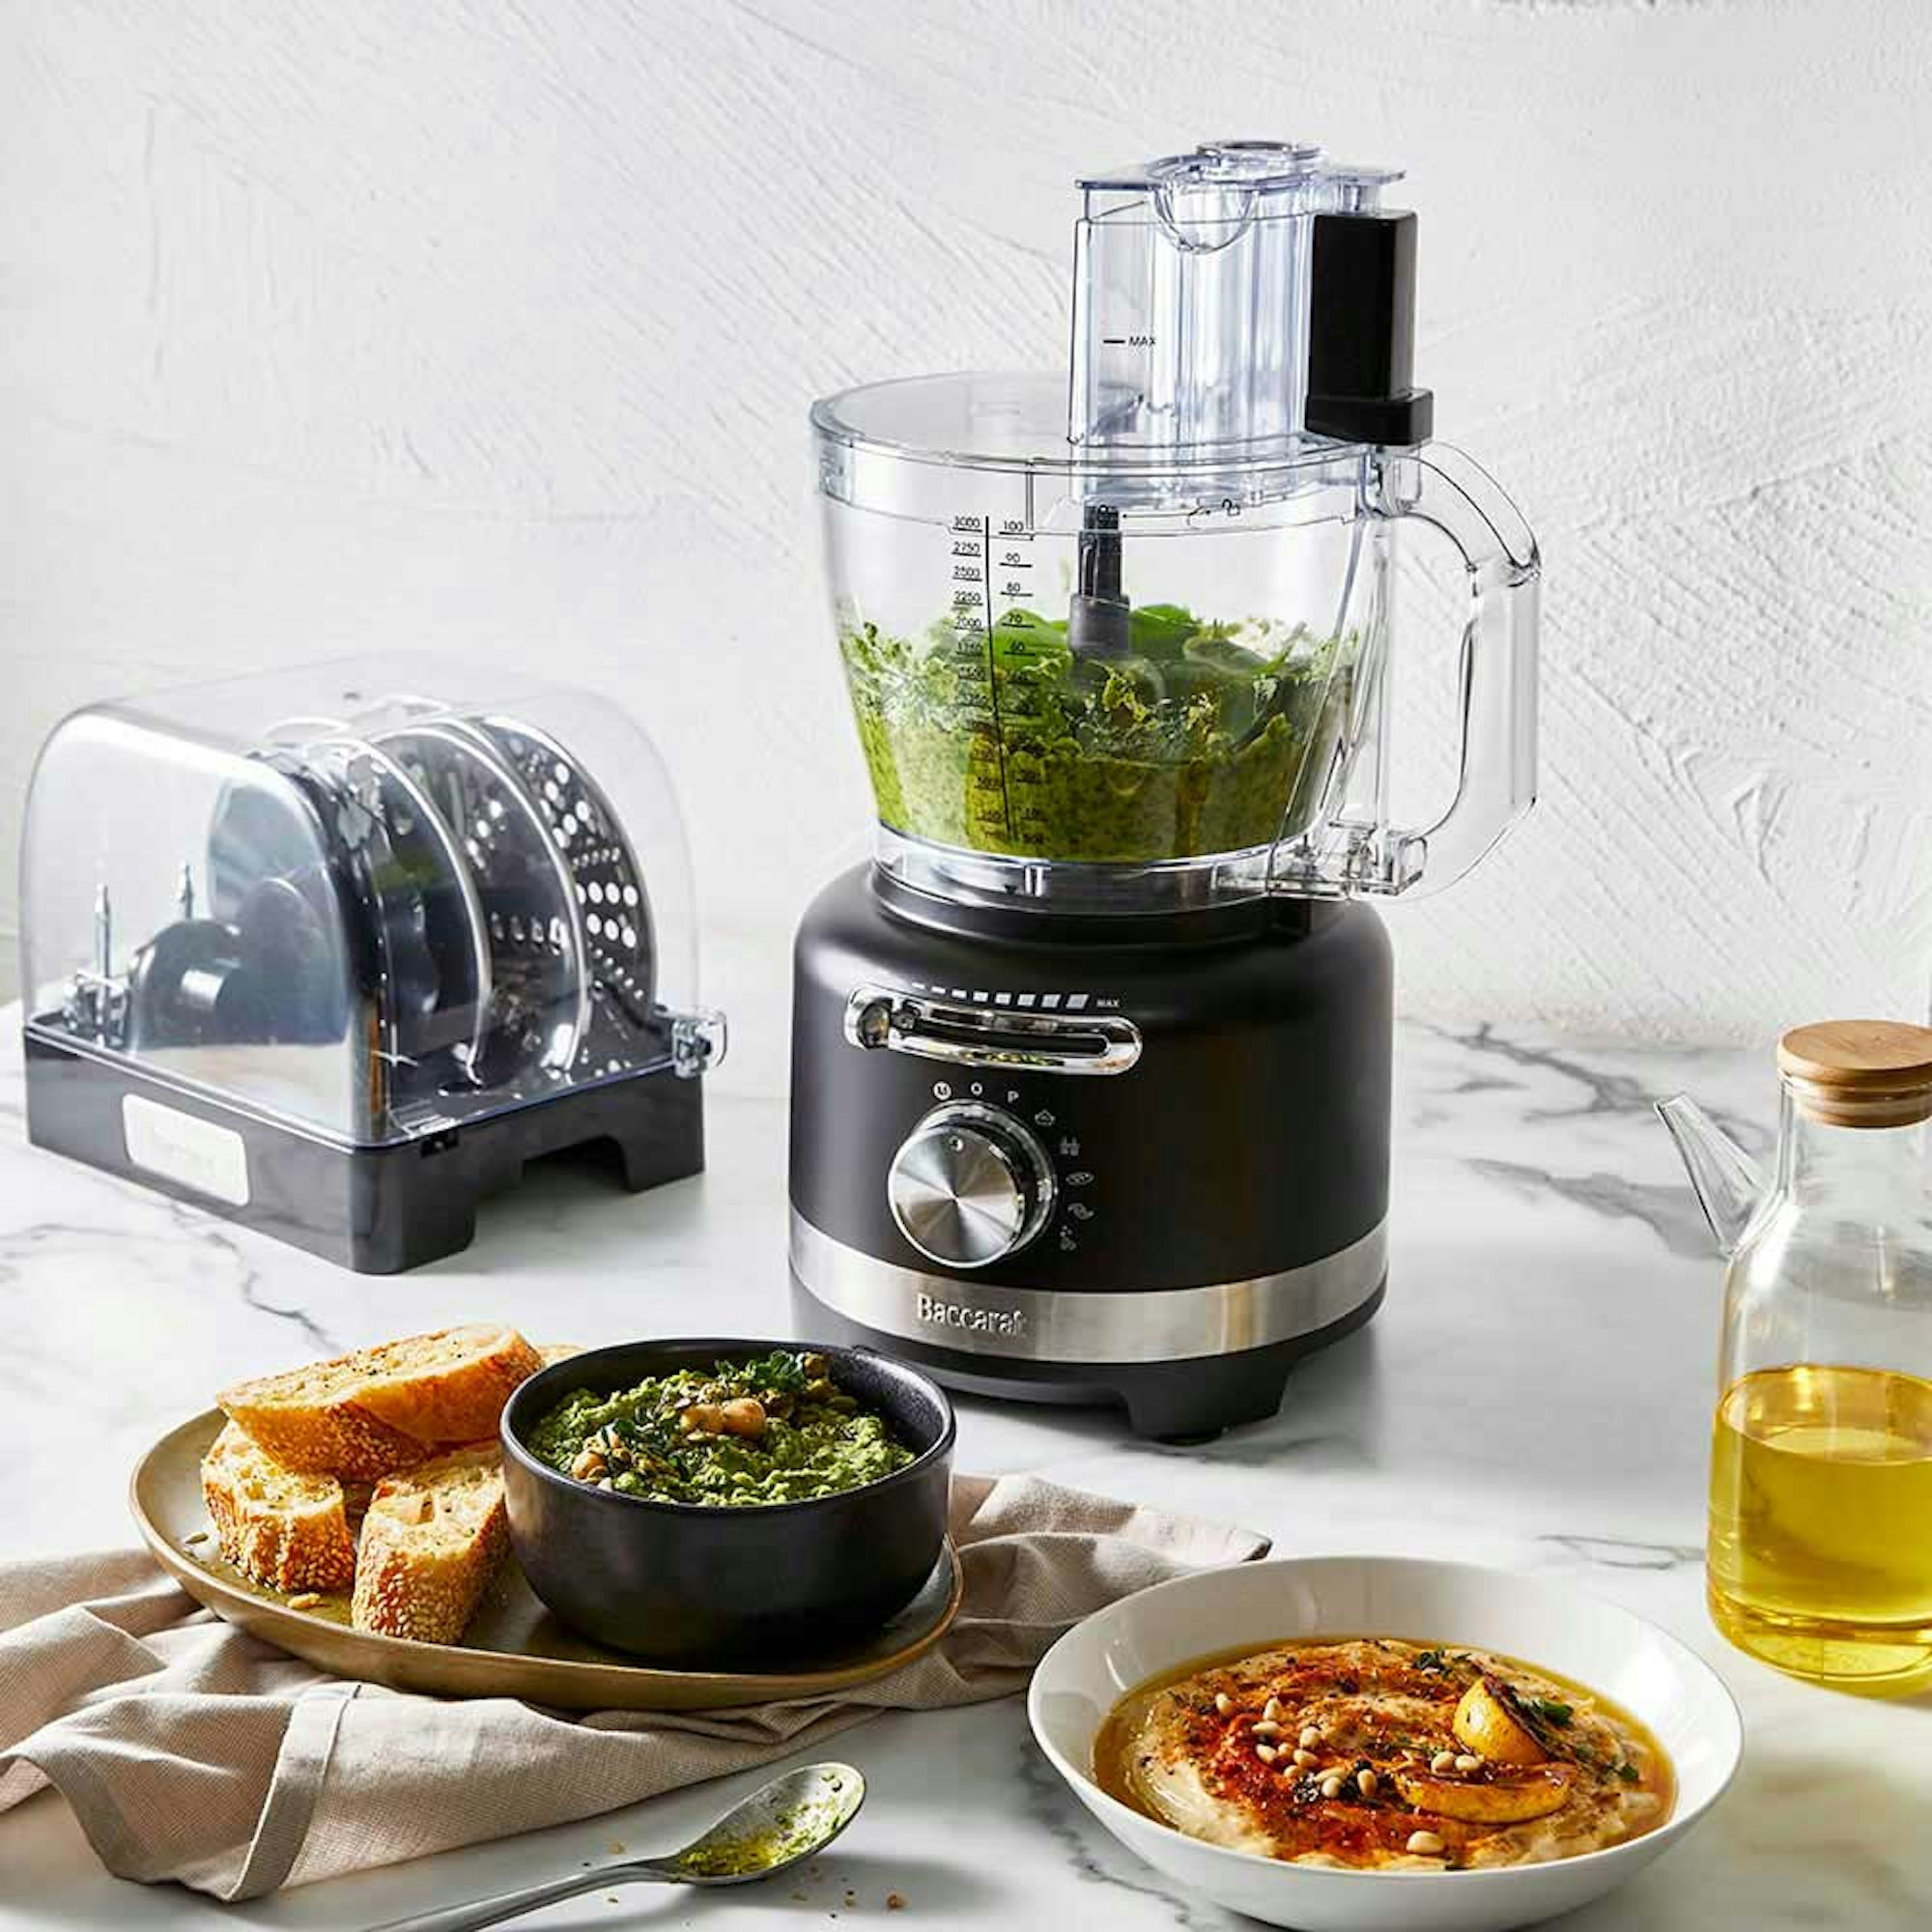 Baccarat The Precise Chopper Food Processor. Mother's day gift guide. 